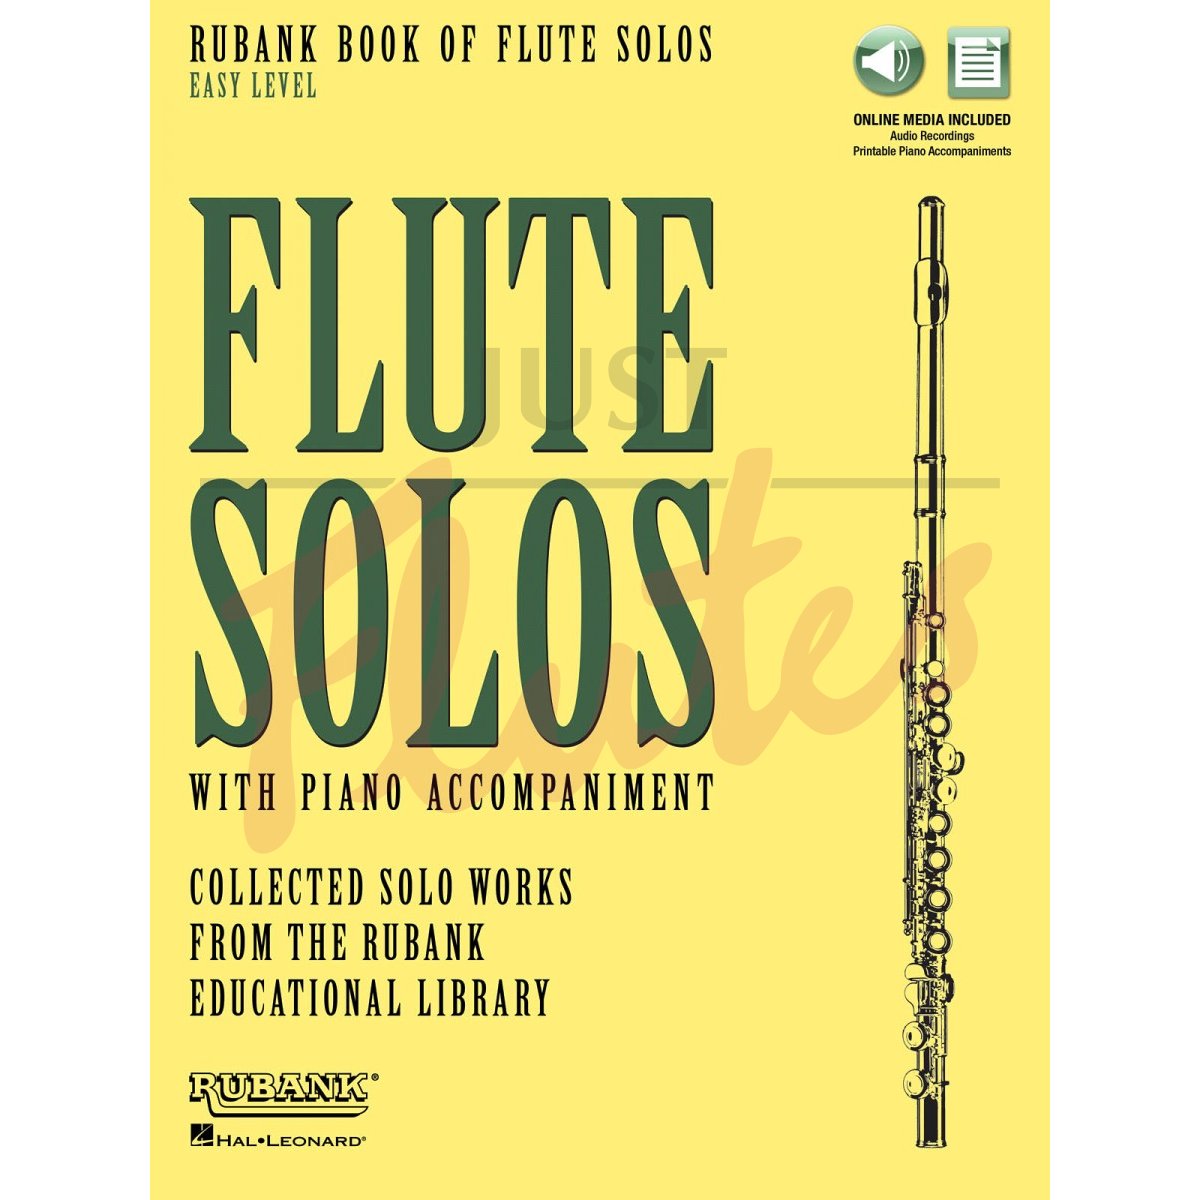 Rubank Book of Flute Solos [Easy Level]